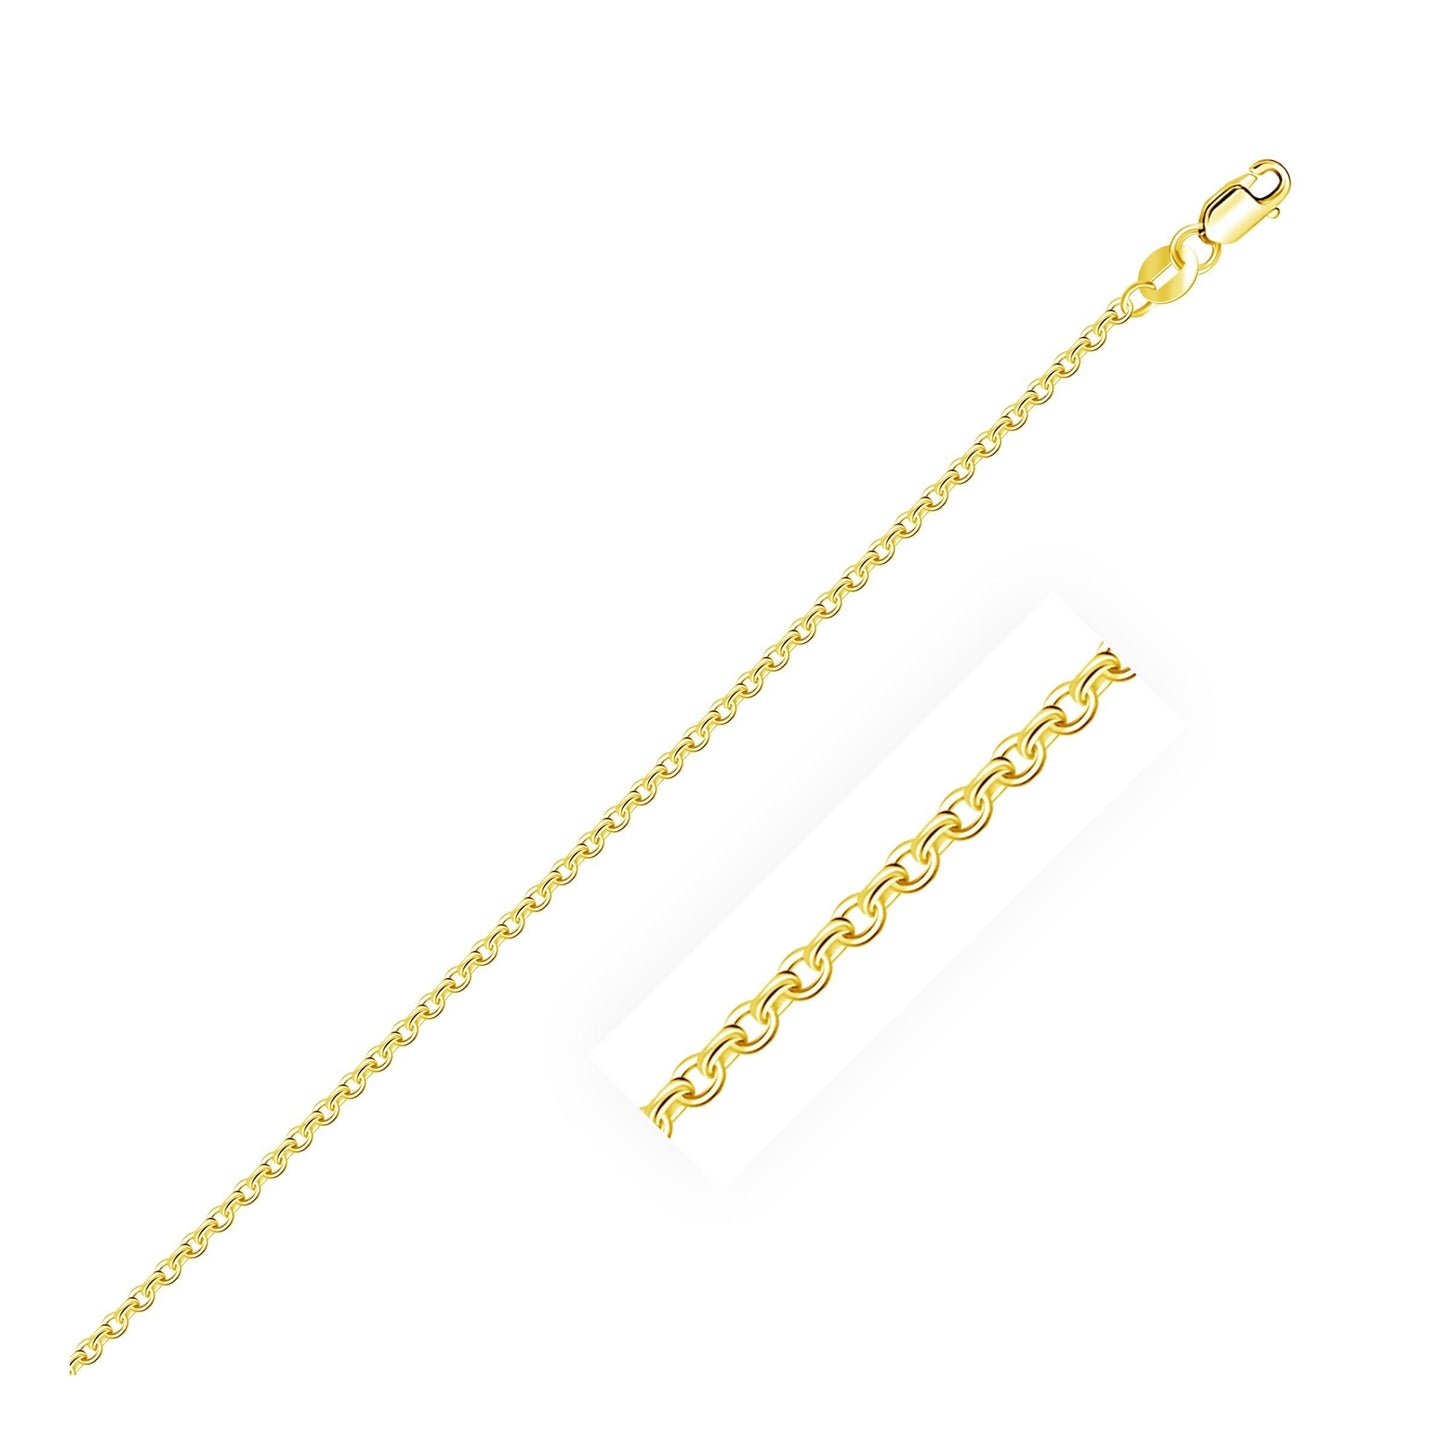 14k Yellow Gold Cable Link Chain in 1.5 mm